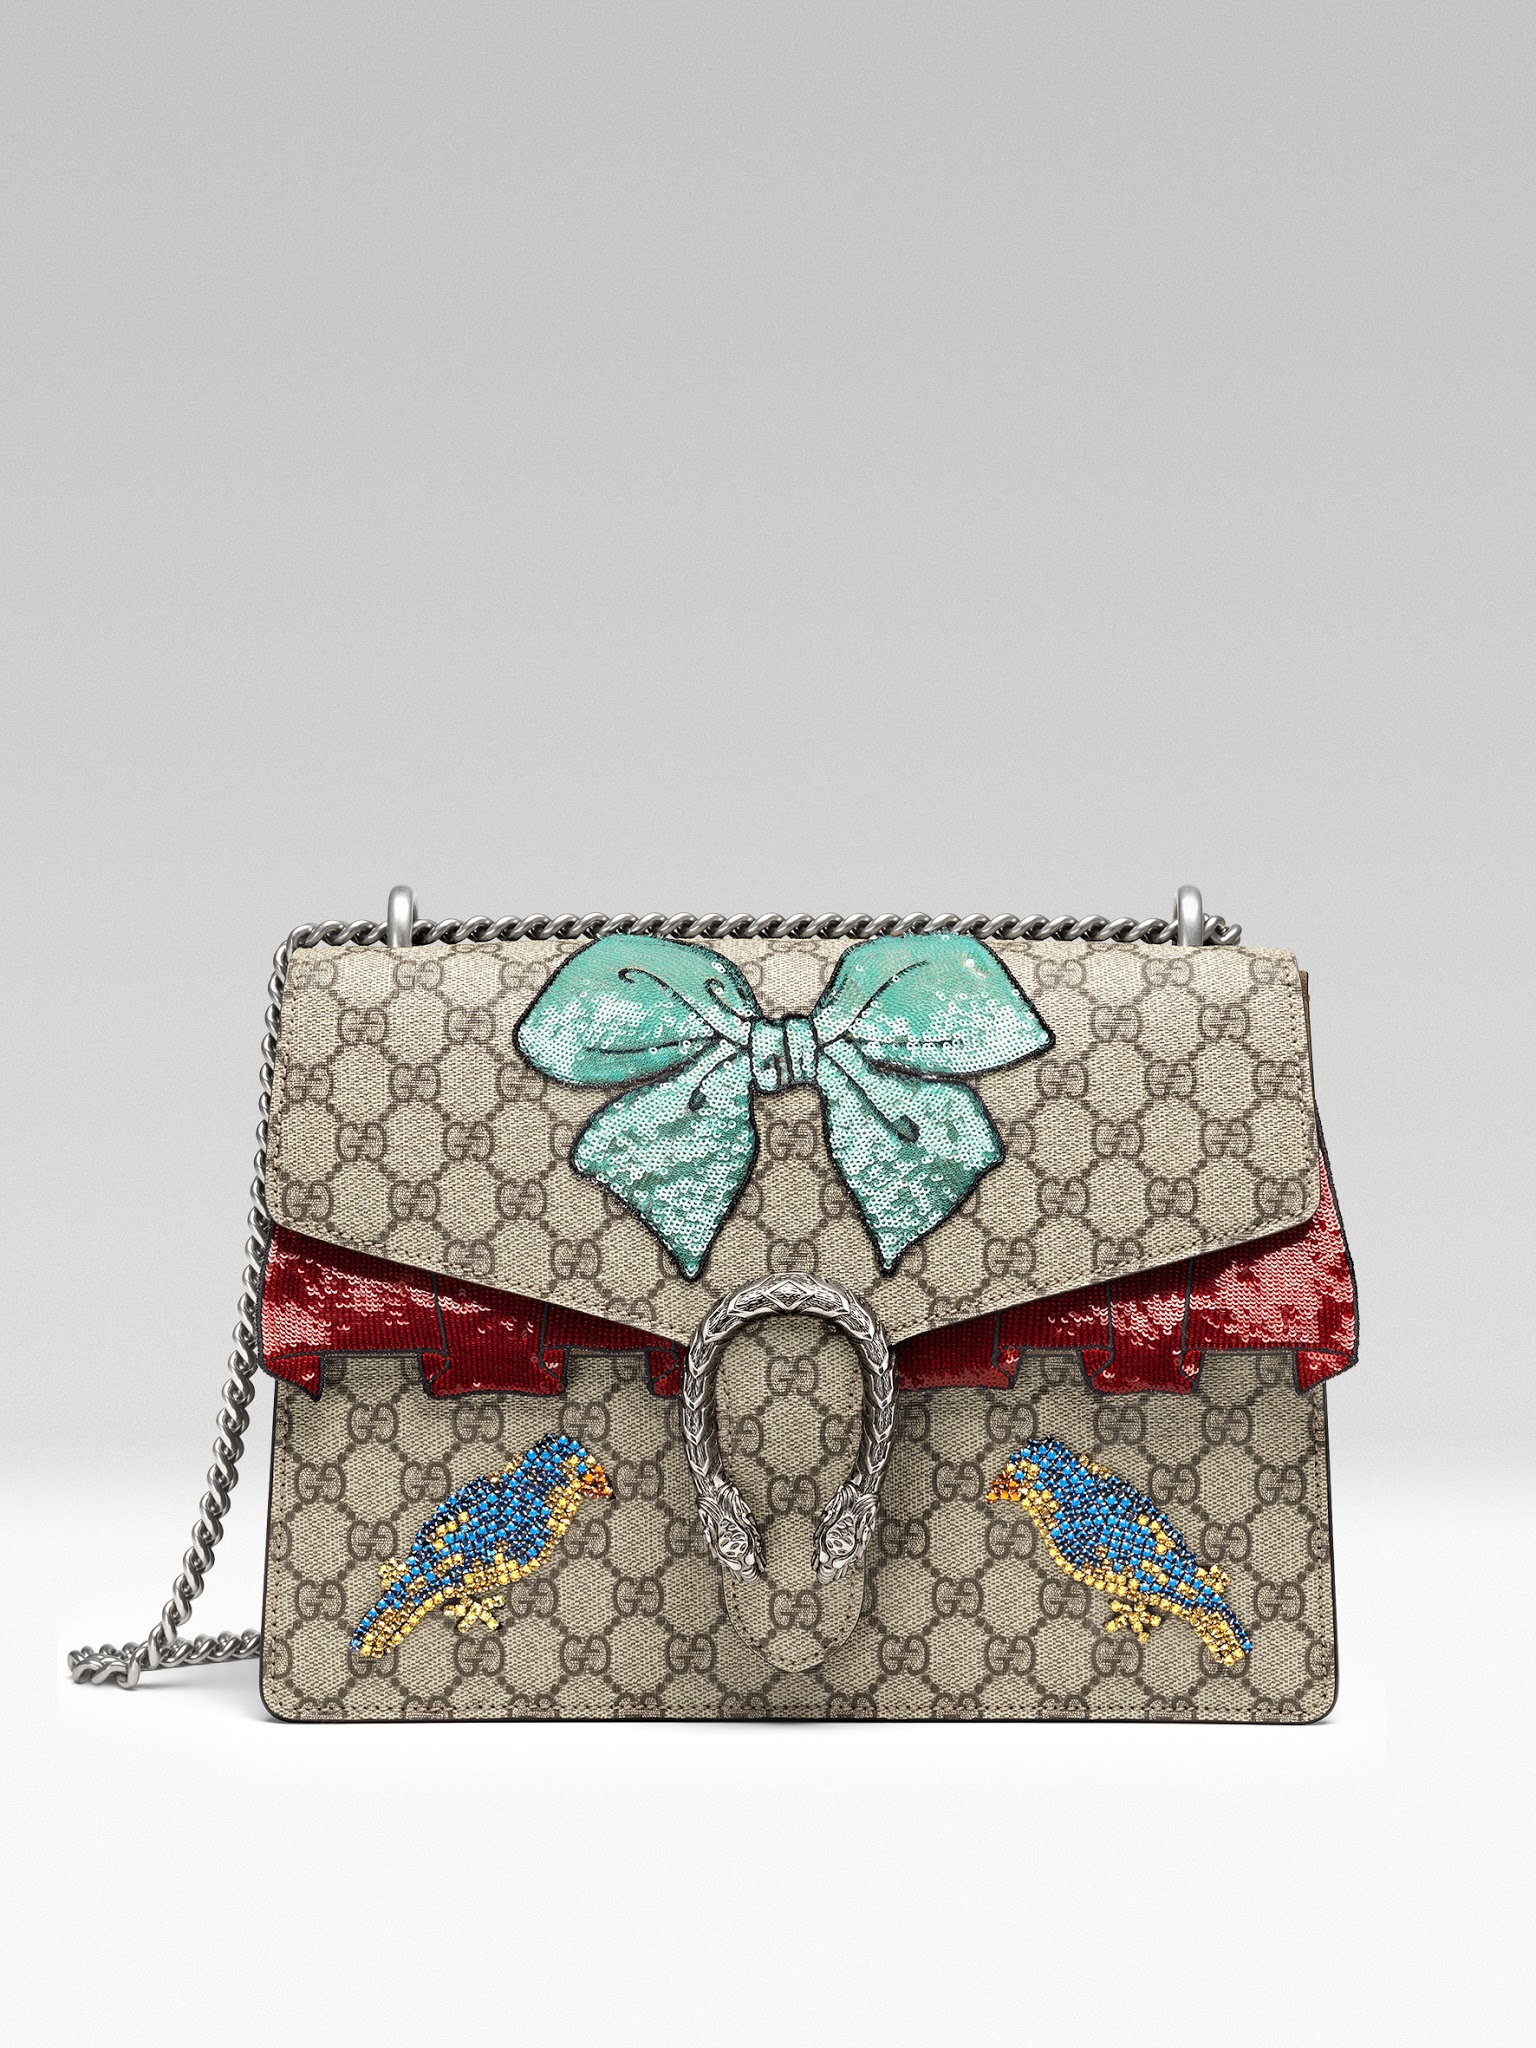 Gucci's Limited Edition Dionysus City 